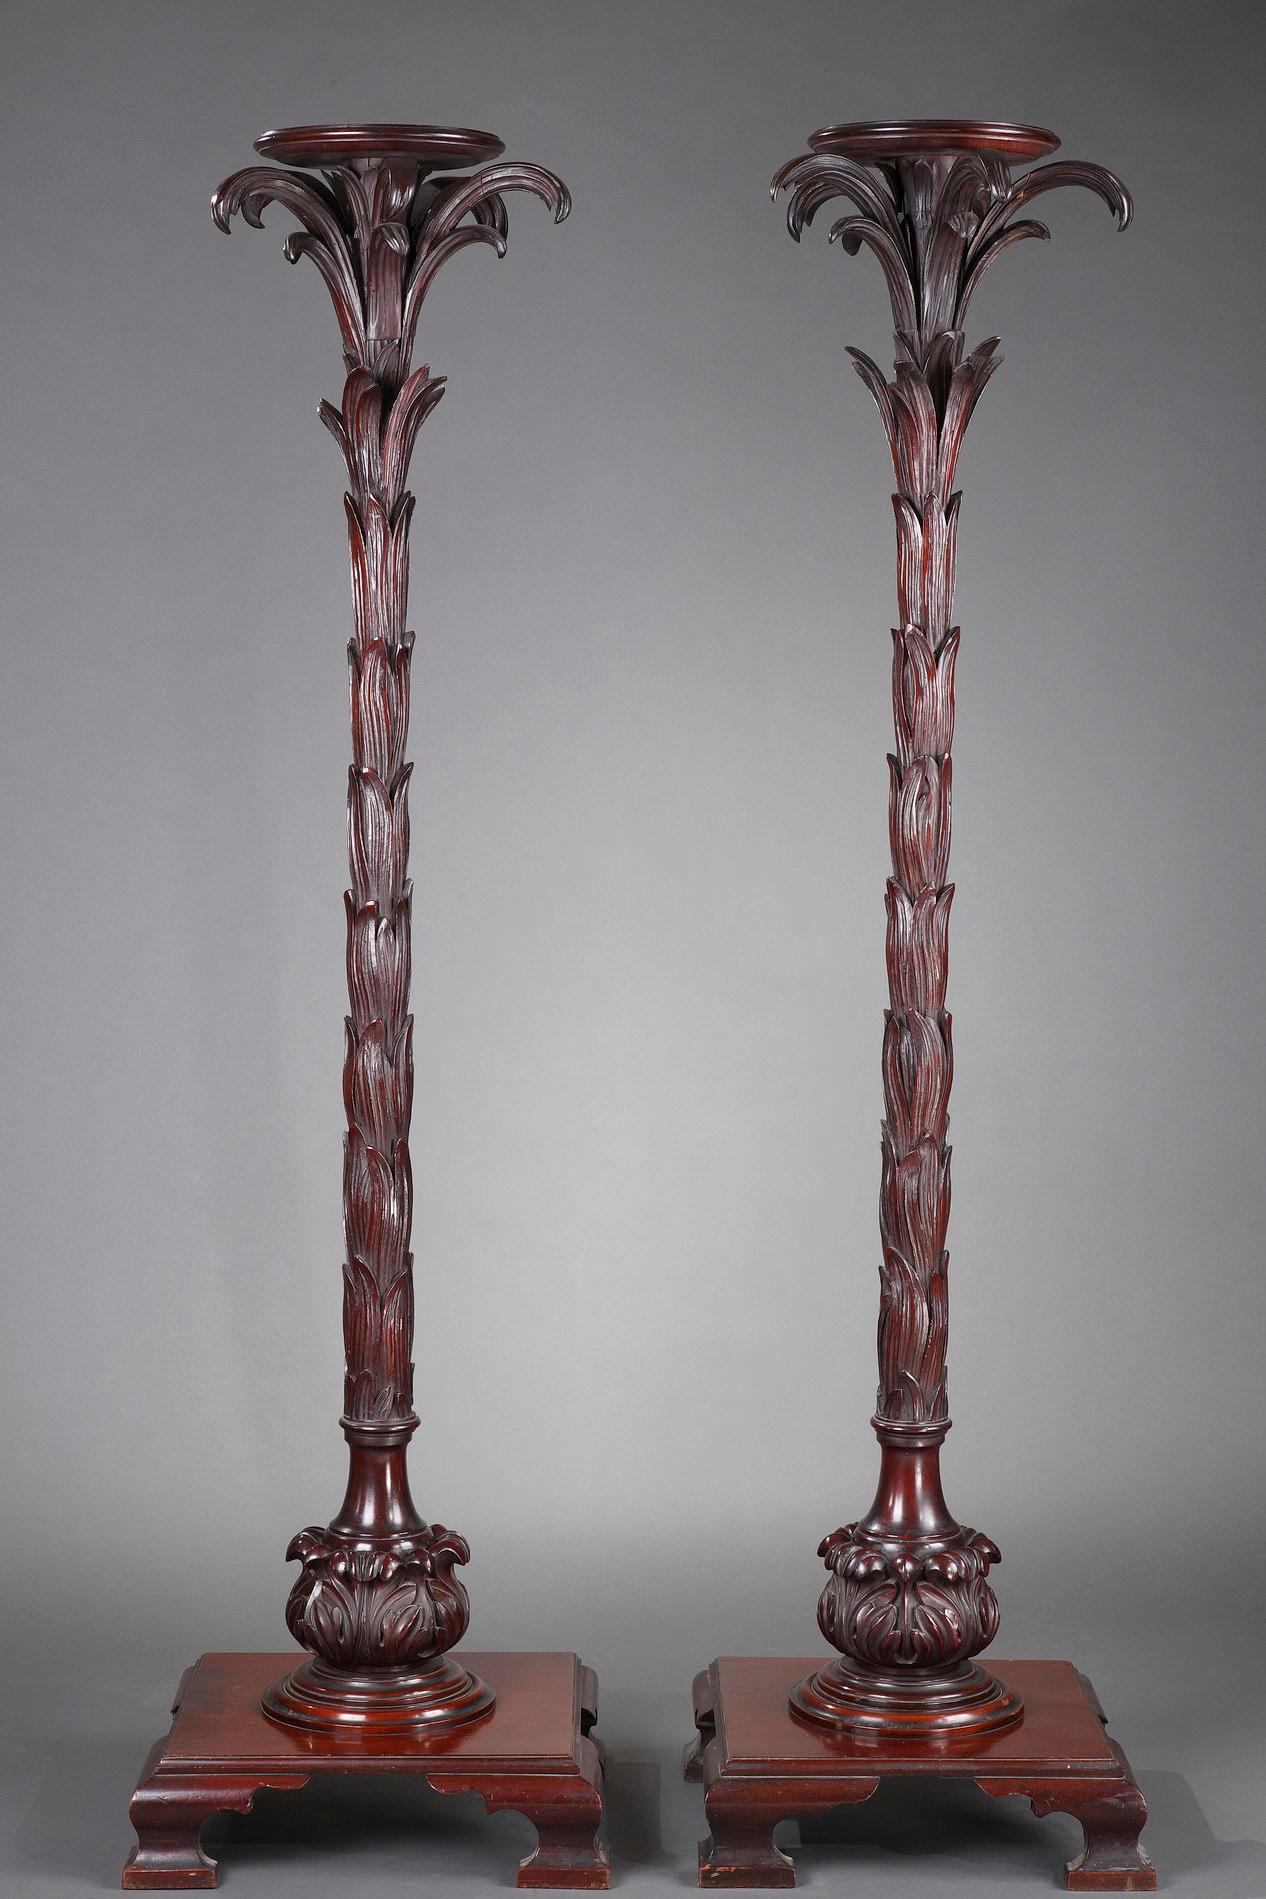 Pair of stands, ornamented with palms sculpted in a naturalistic fashion. Surmounted with a small circular top. Foot ornamented with acanthus leaves, resting on a rectangular pierced base.